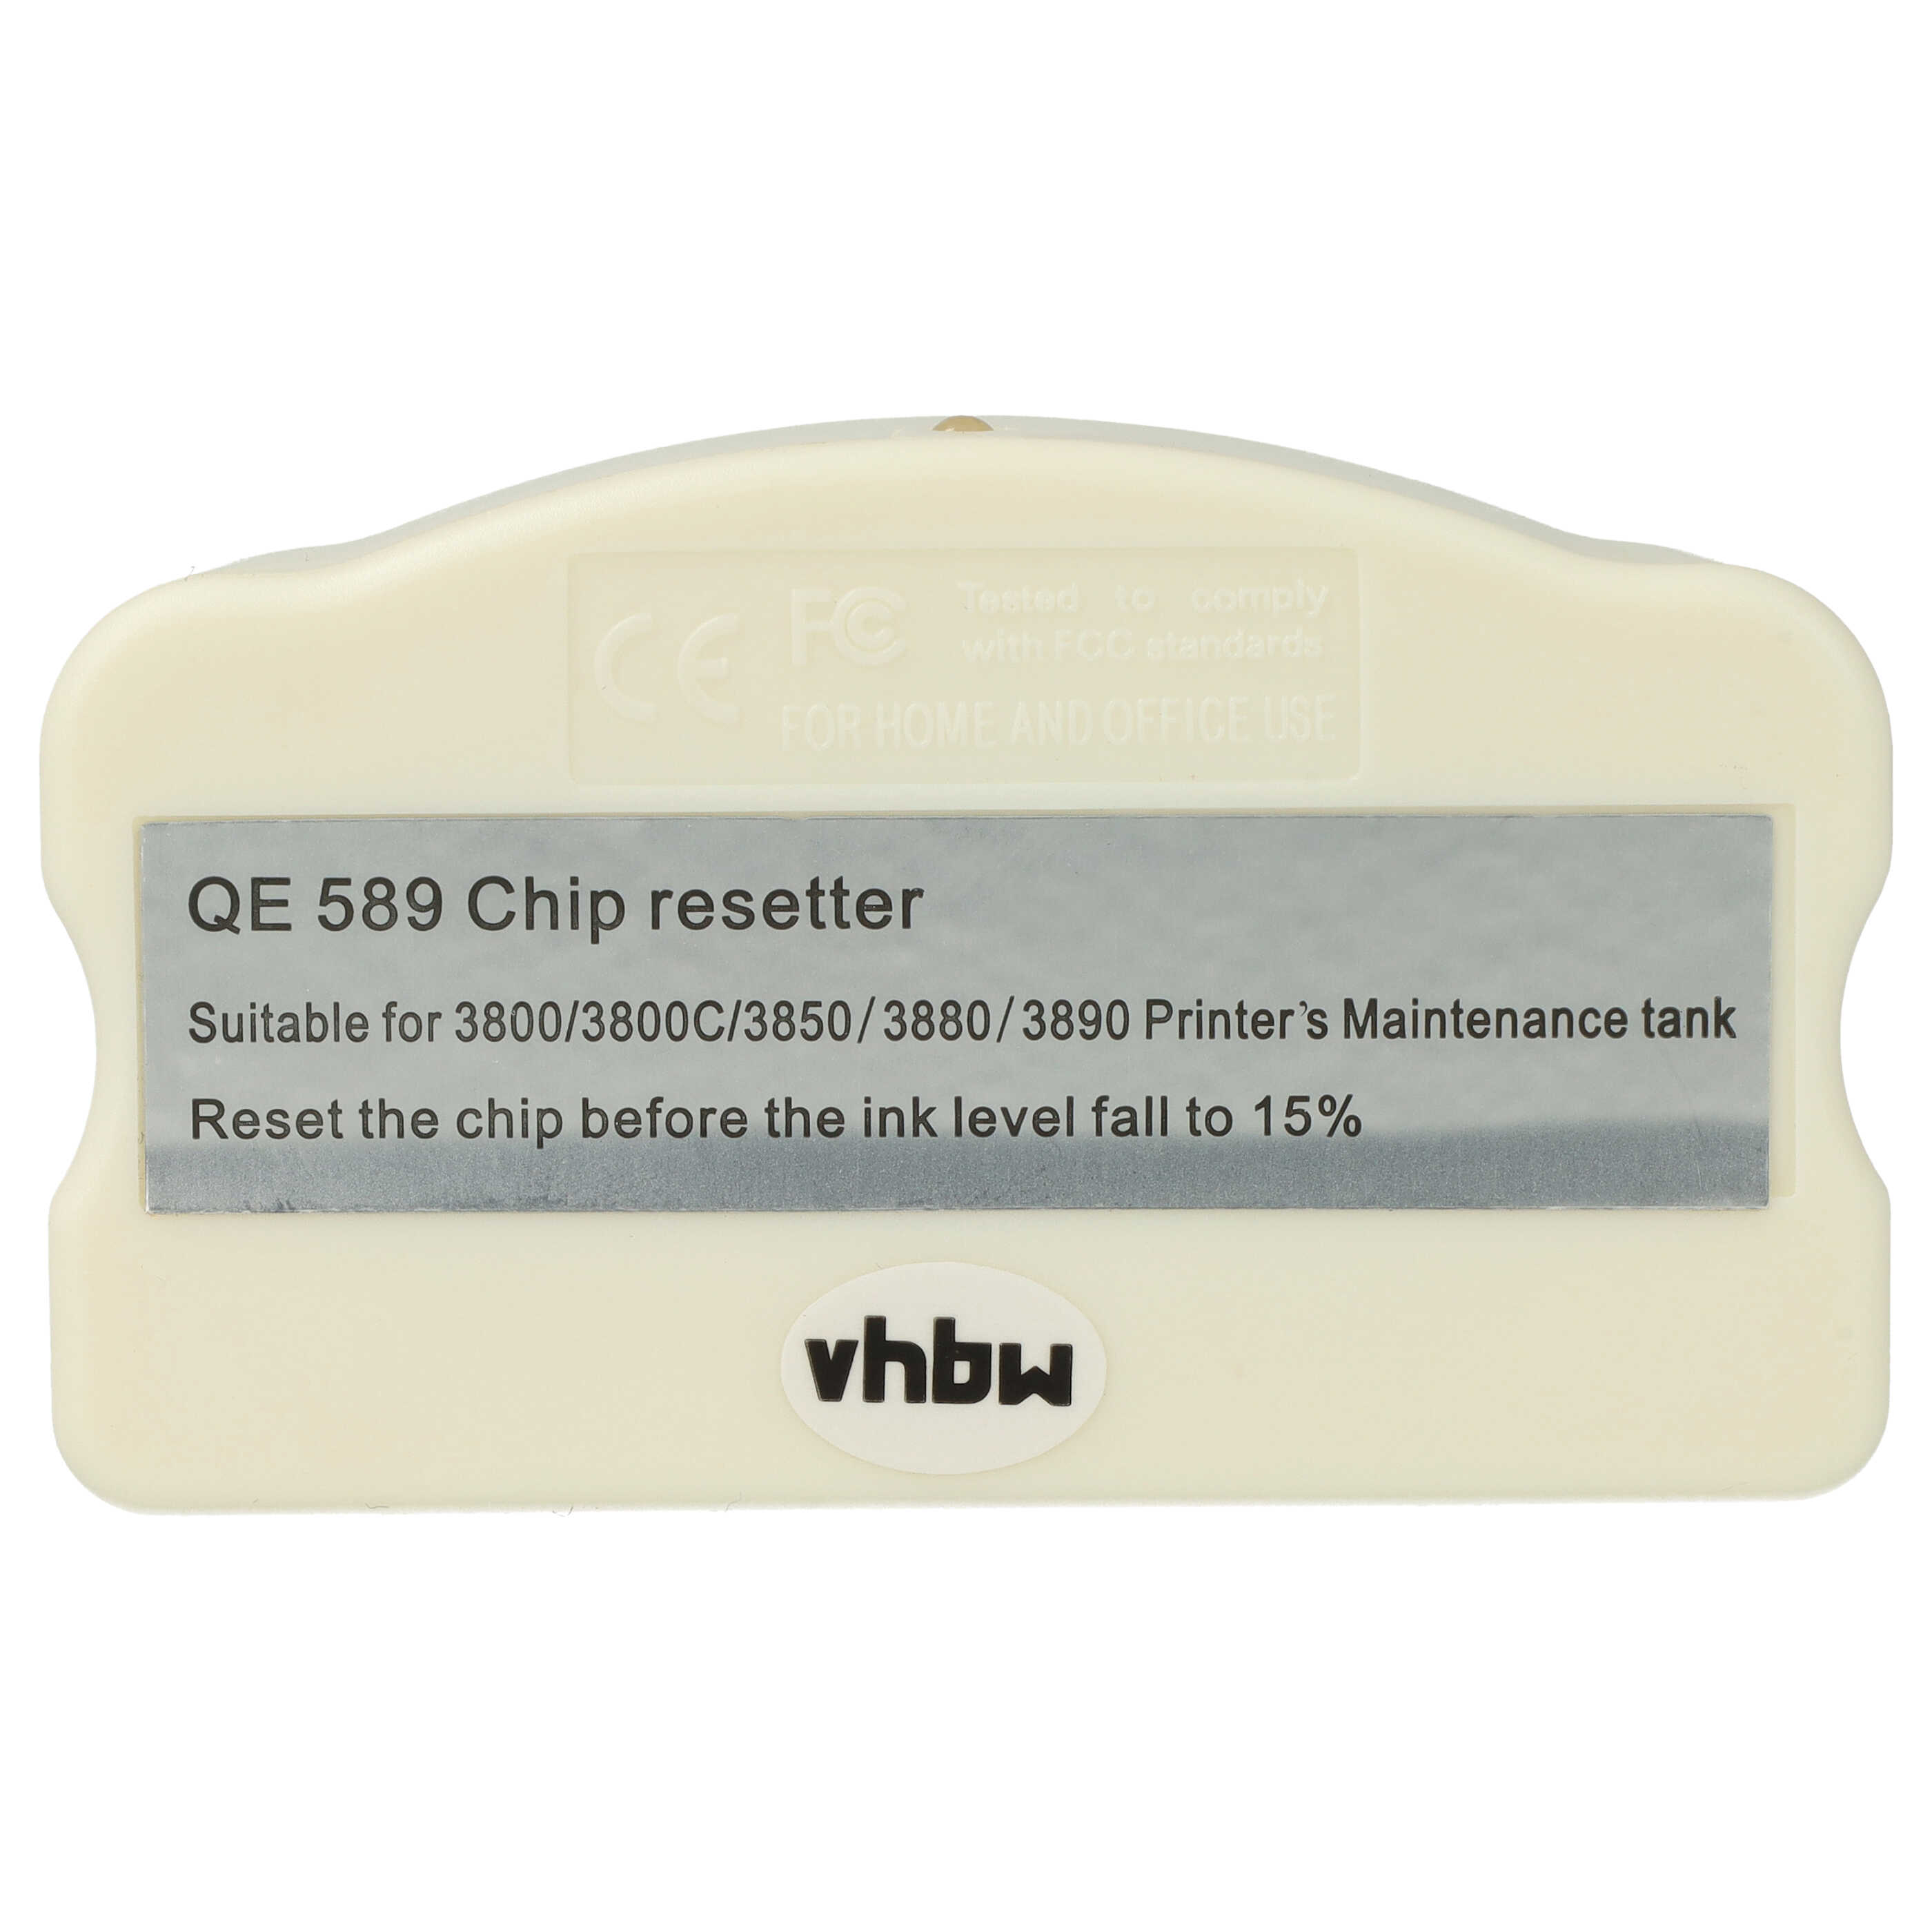 Chip Resetter replaces Epson T580100, T580400, T580500, T580200, T580300 for Epsonprinter, ink cartridge